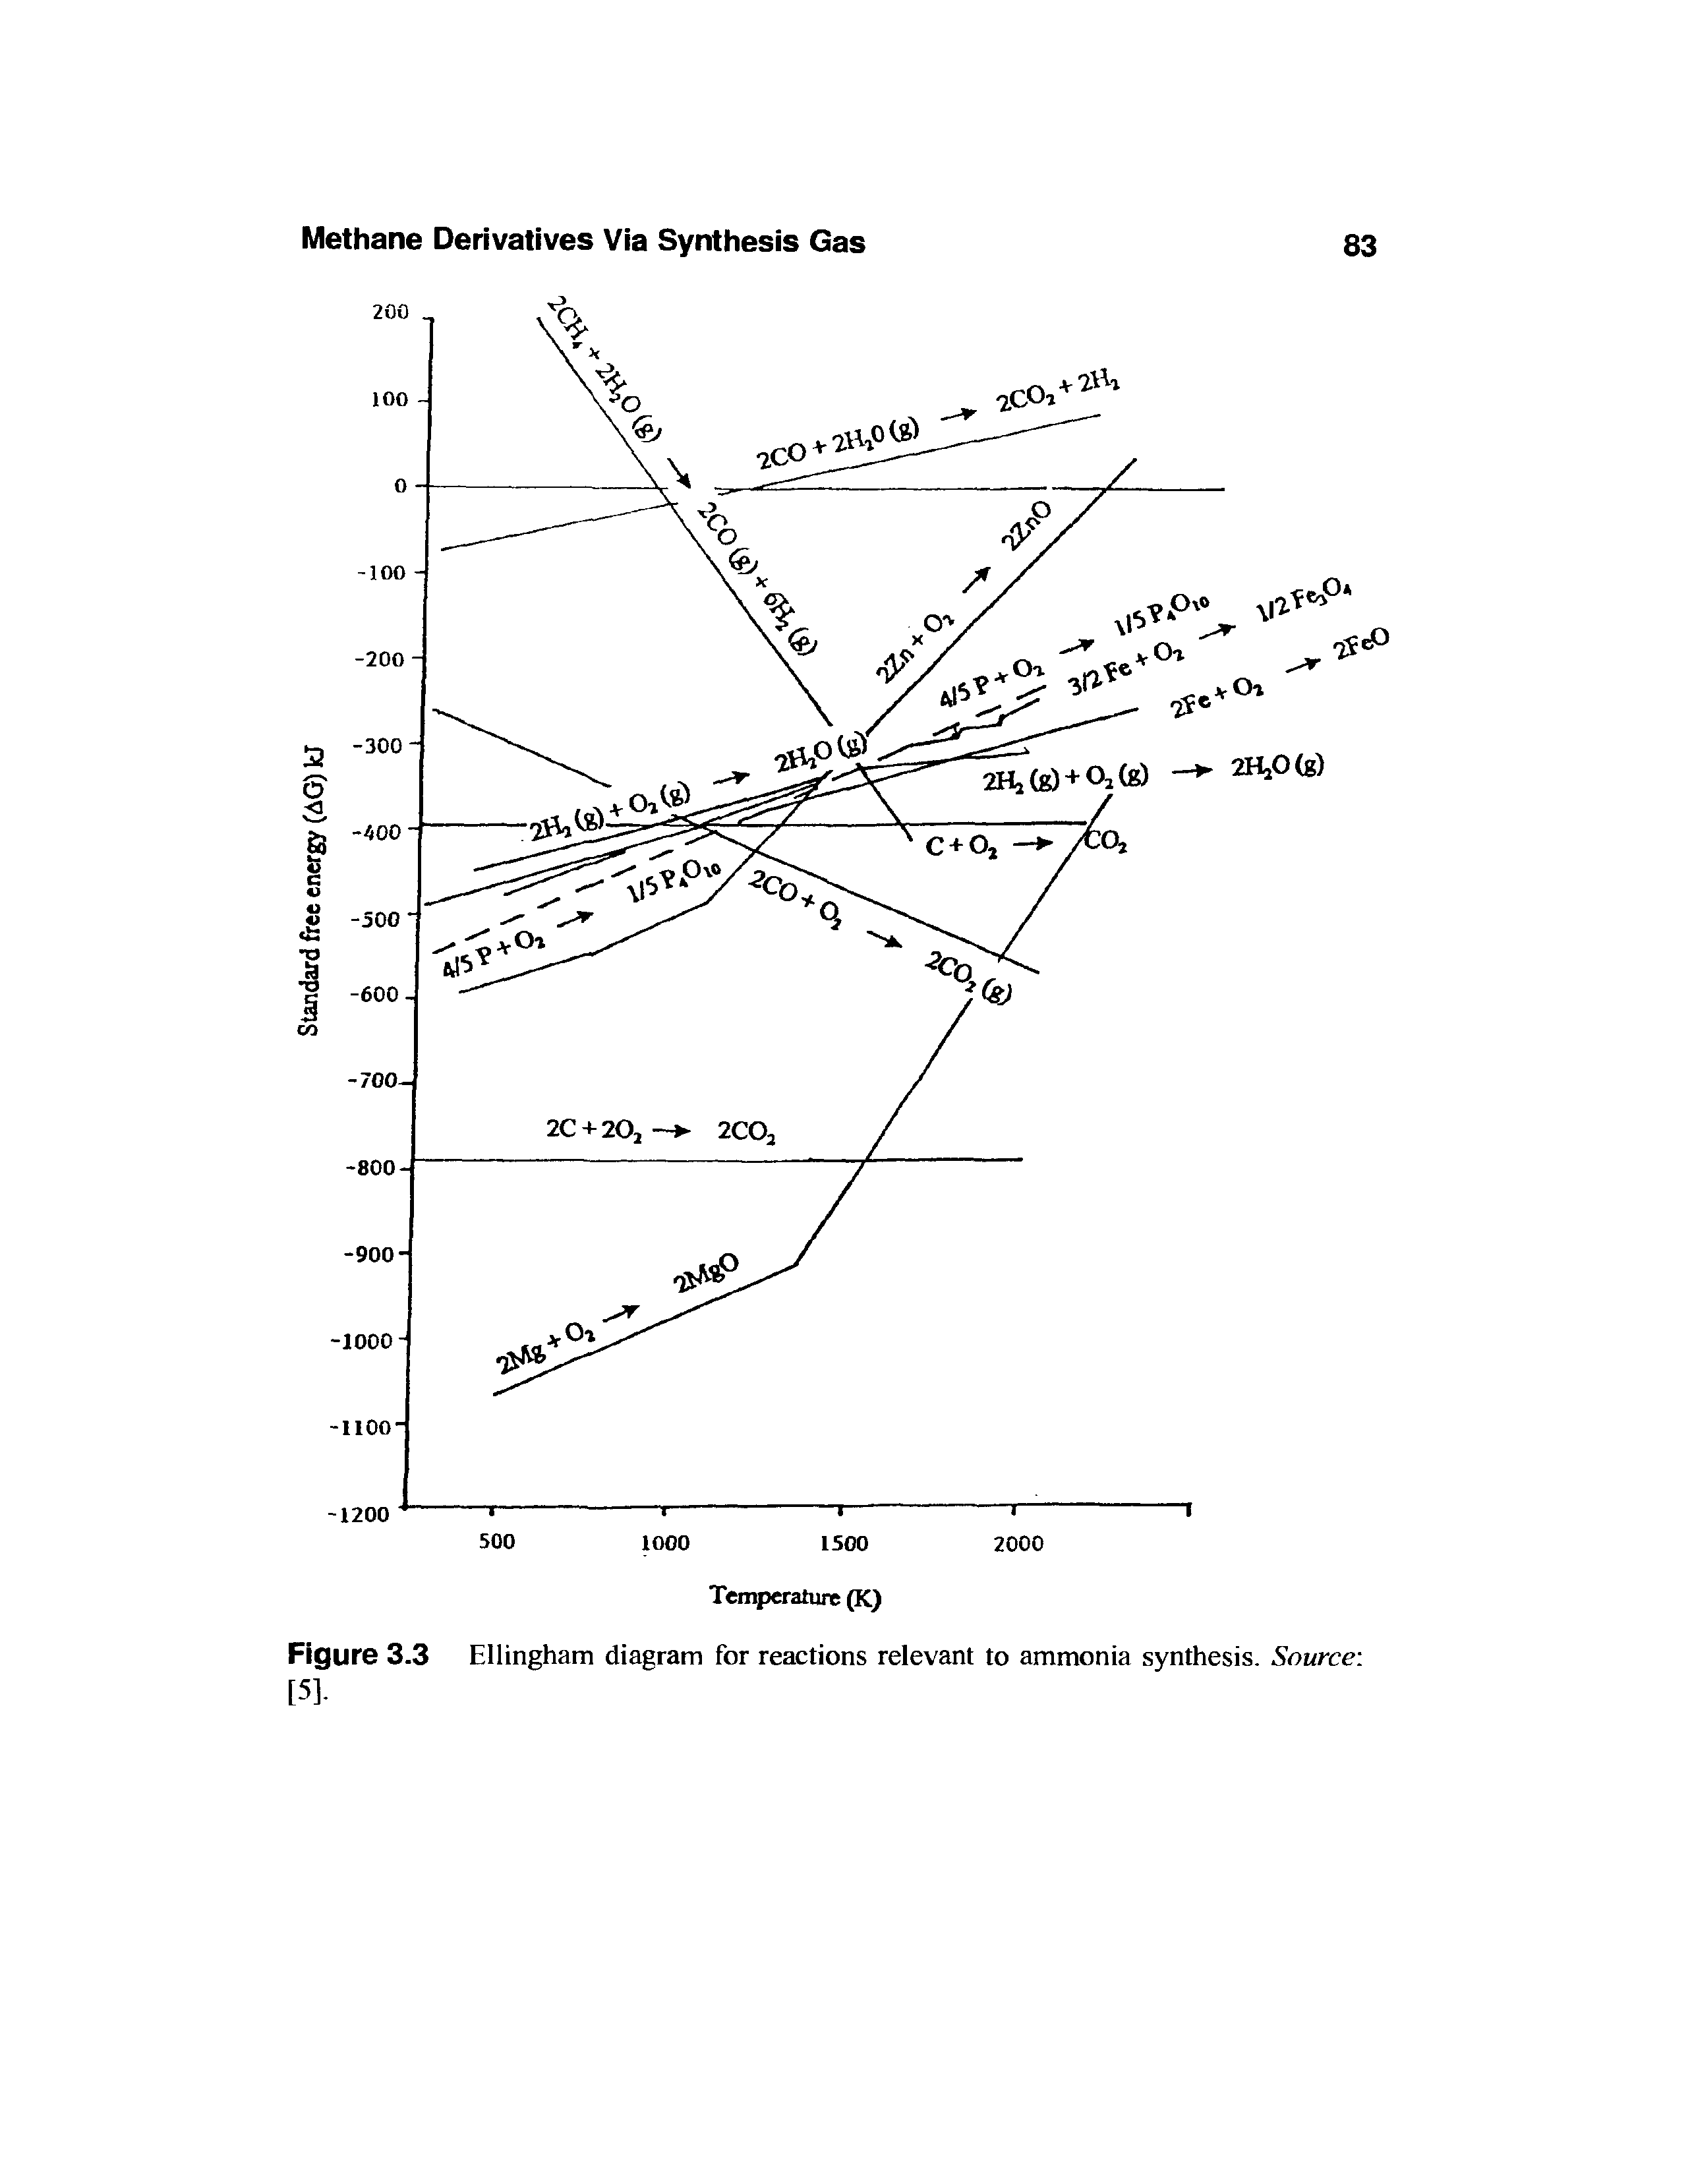 Figure 3.3 Ellingham diagram for reactions relevant to ammonia synthesis. Source [5].